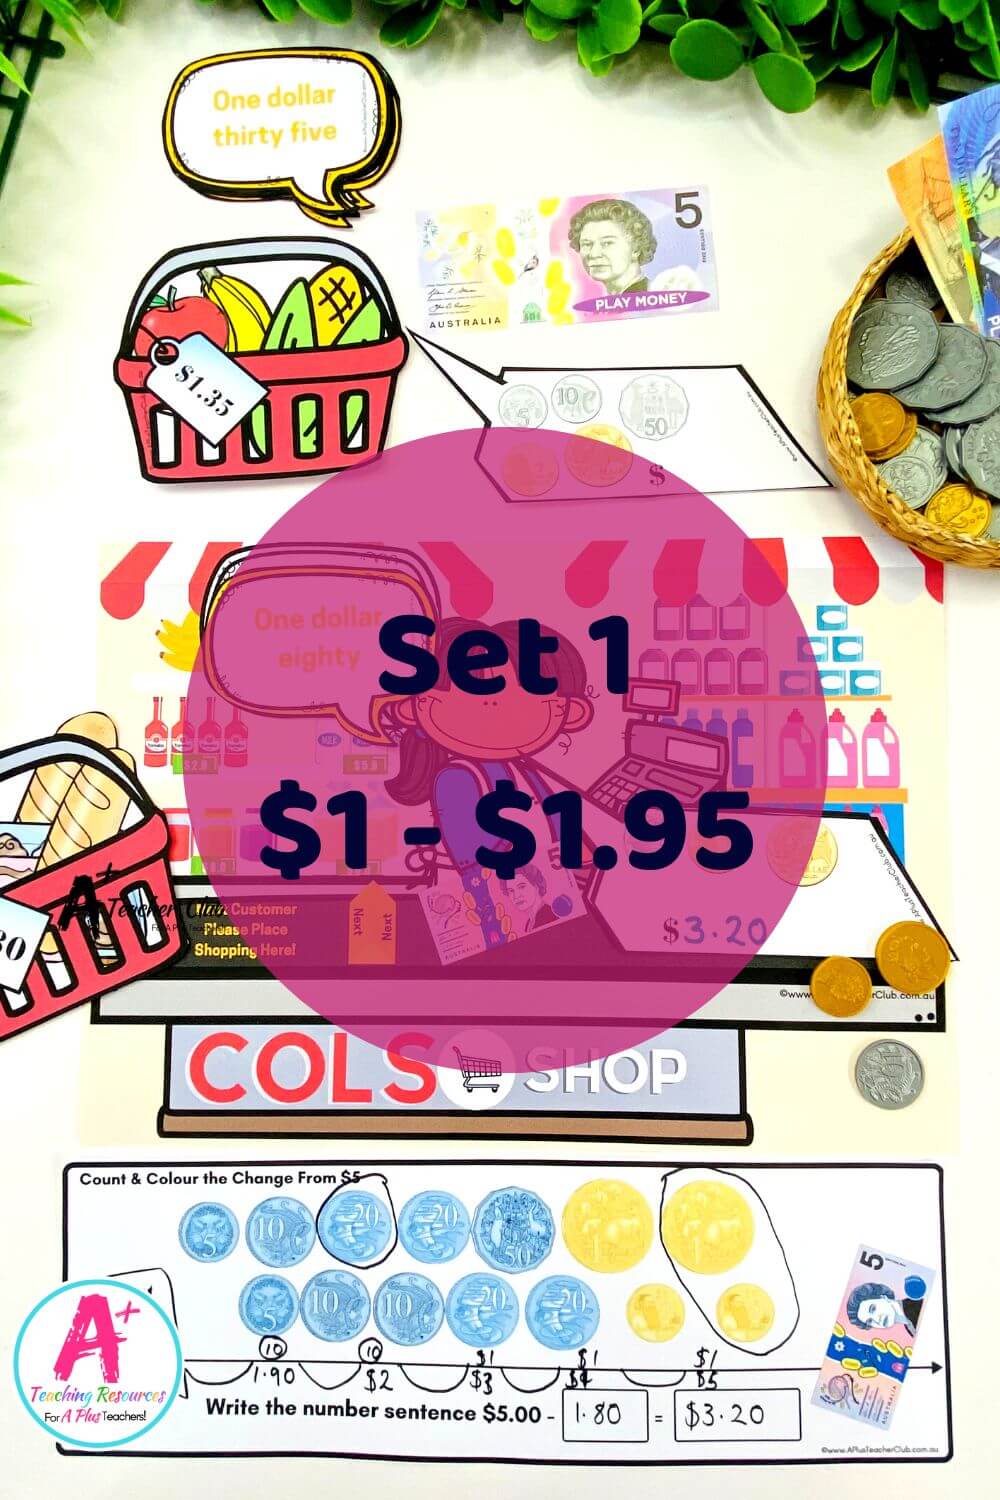 Counting Change Games - COLS Set 1 ($1-$1.95)